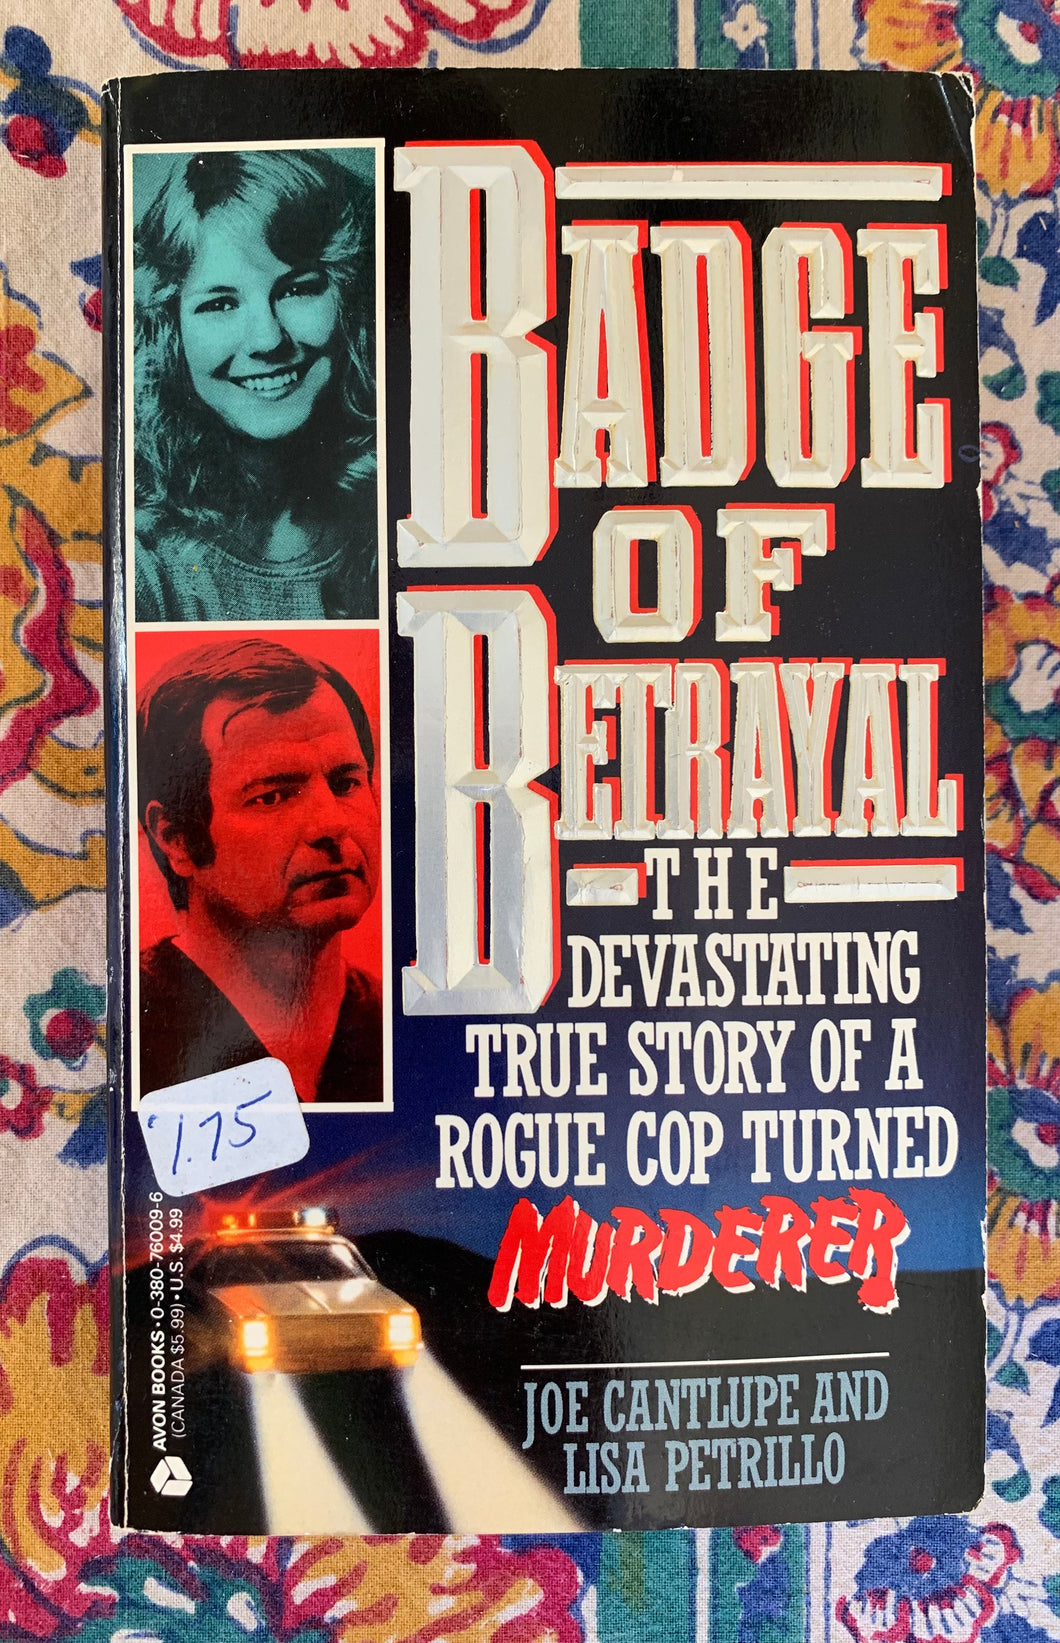 Badge of Betrayal: The Devastating True Story of a Rogue Cop Turned Murderer